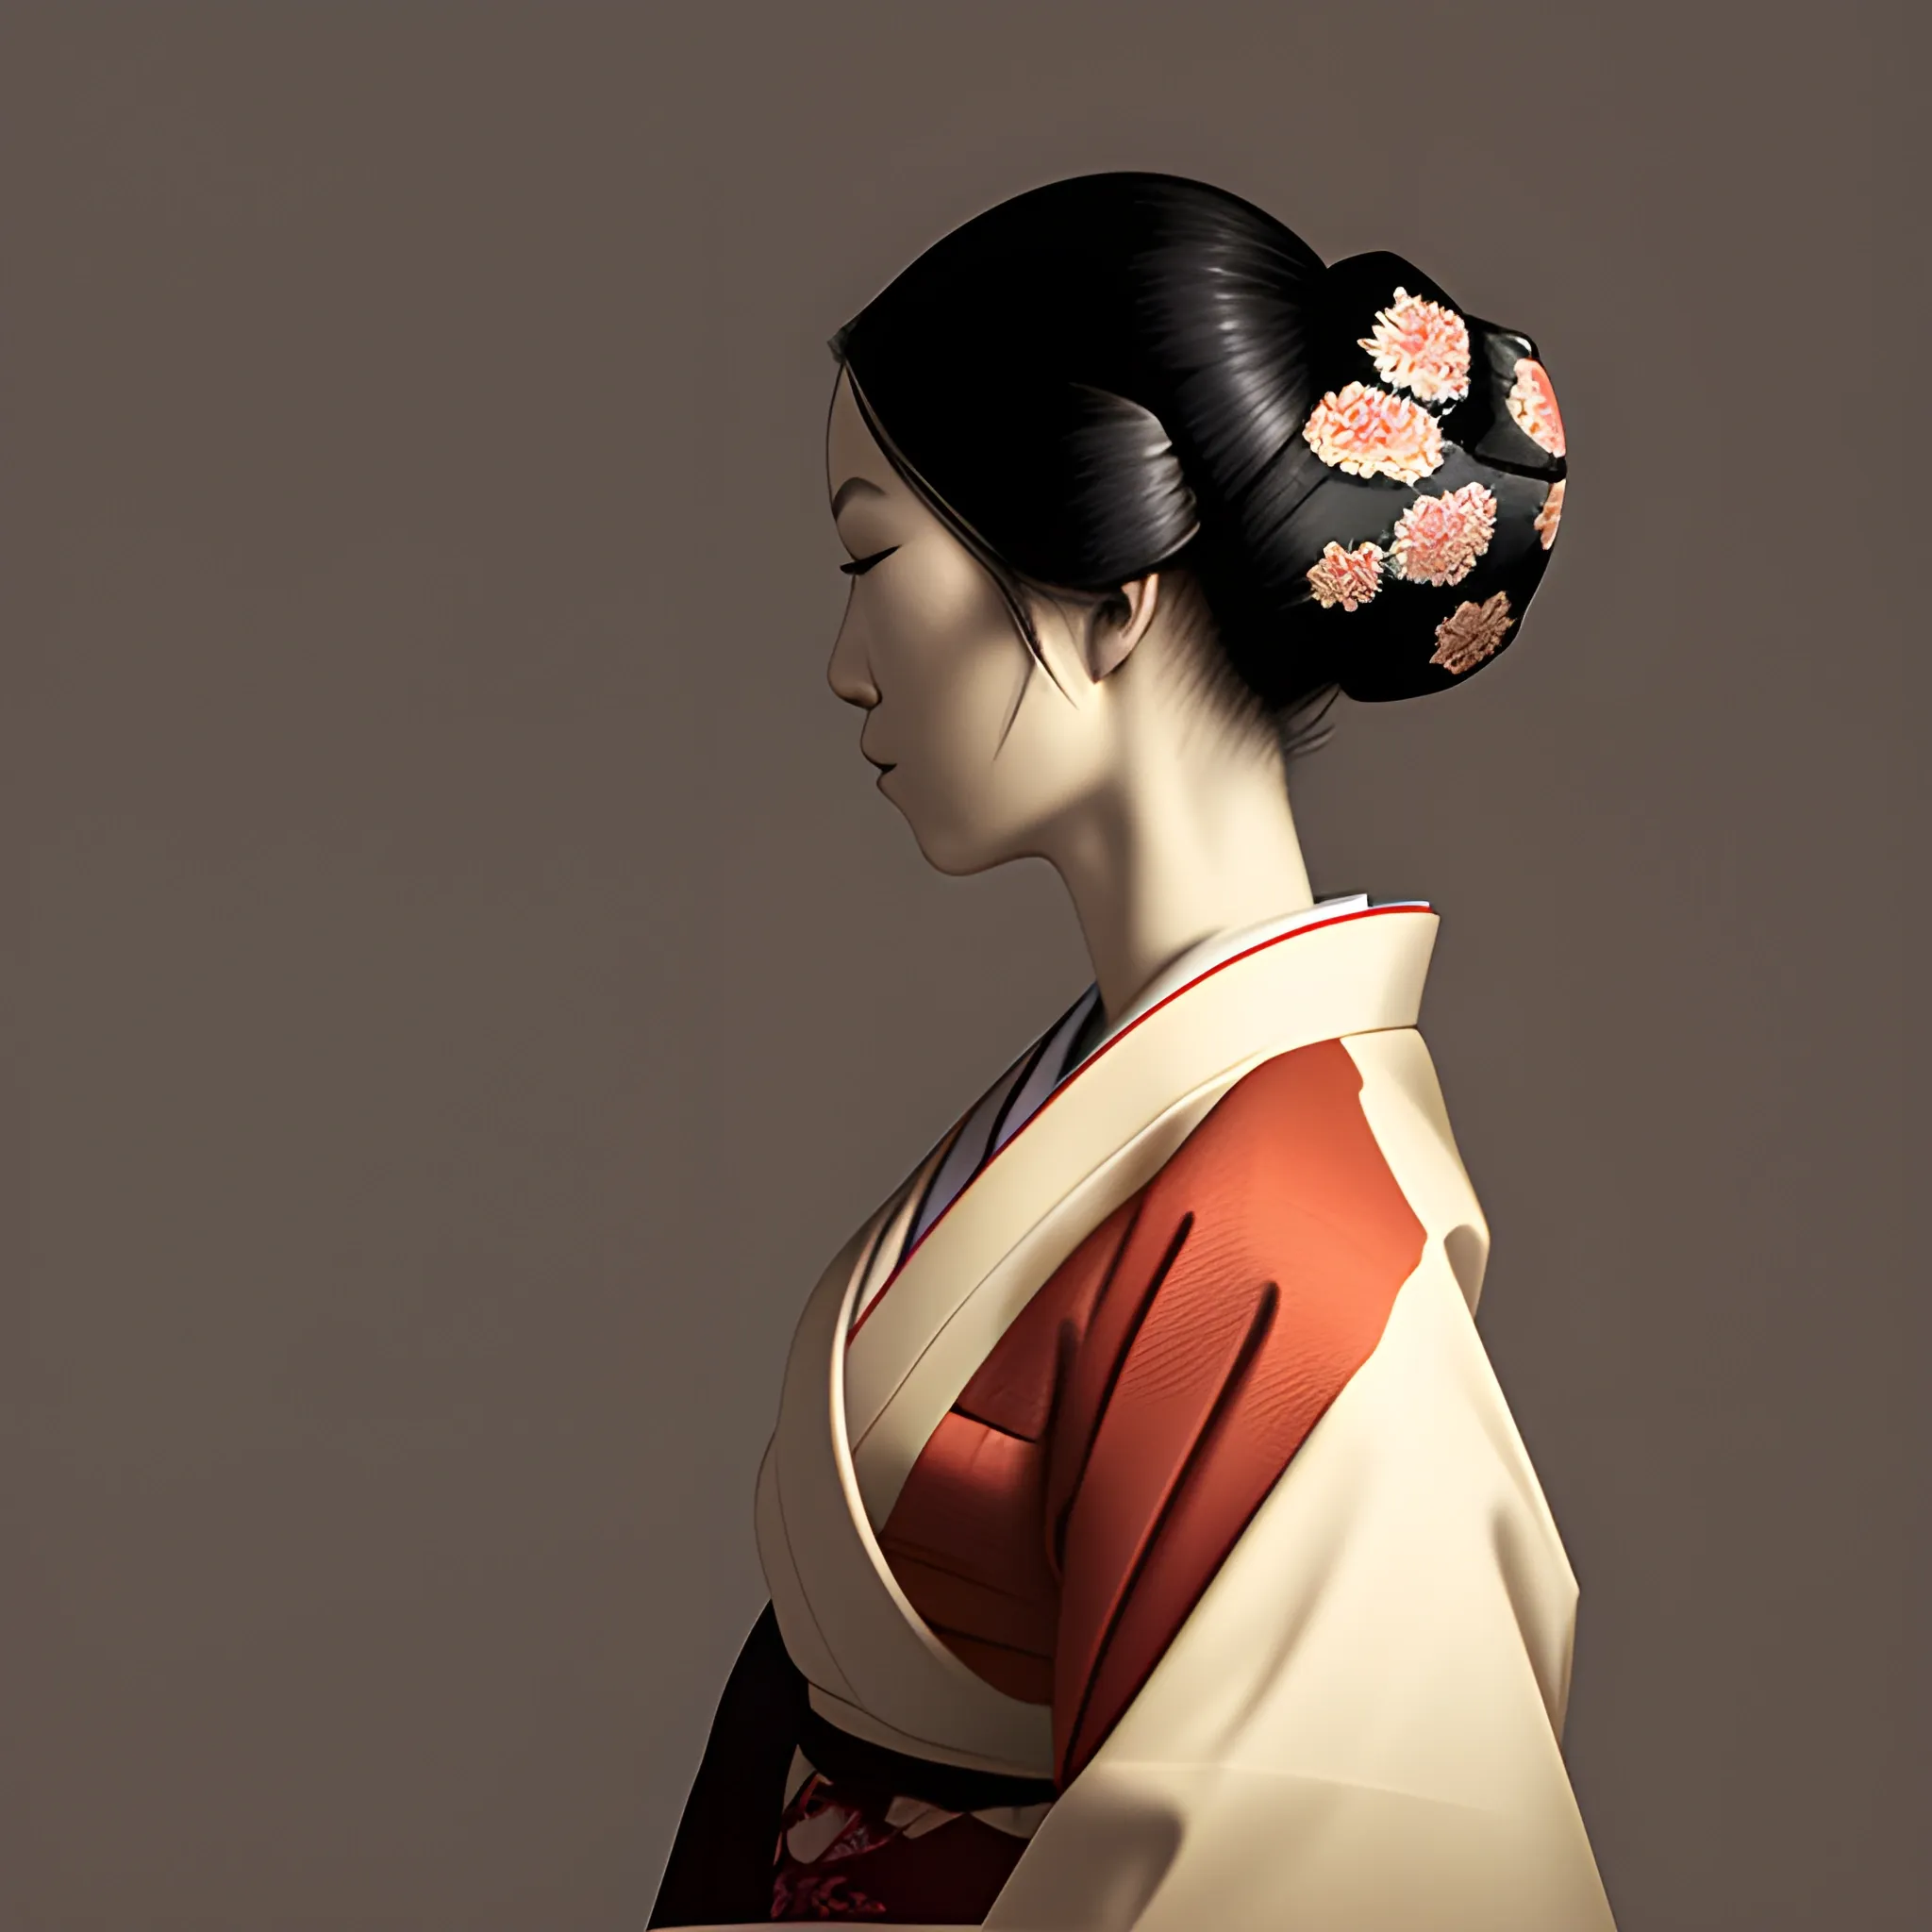 Side view of a woman wearing a kimono in a chiaroscuro style